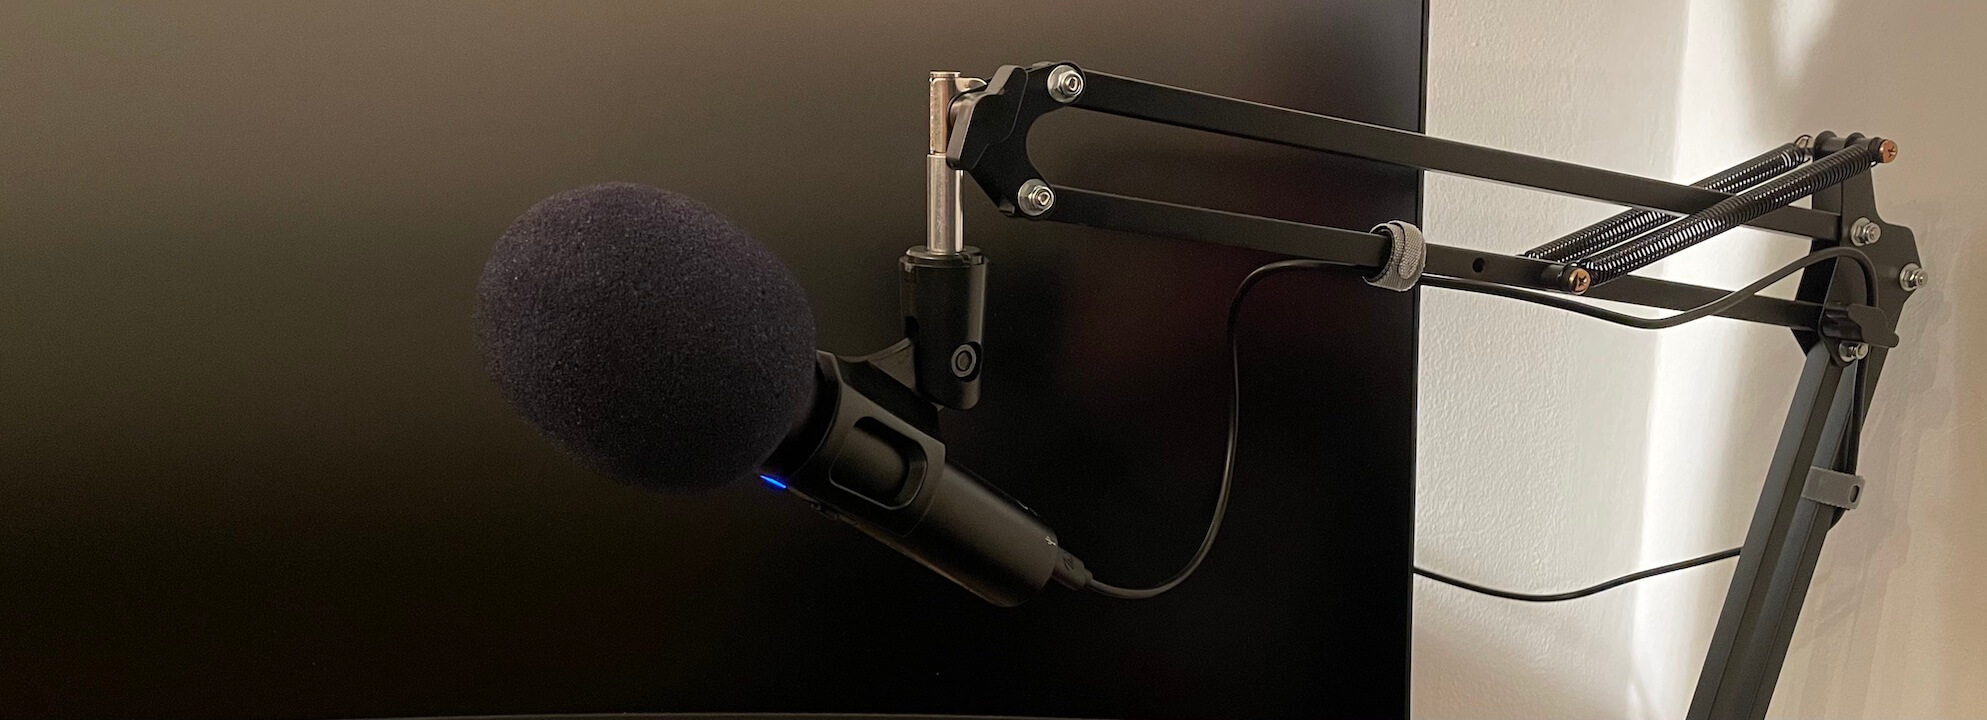 Rode PSA1 - A Dependable Boom Arm for Podcasters - The Podcast Haven